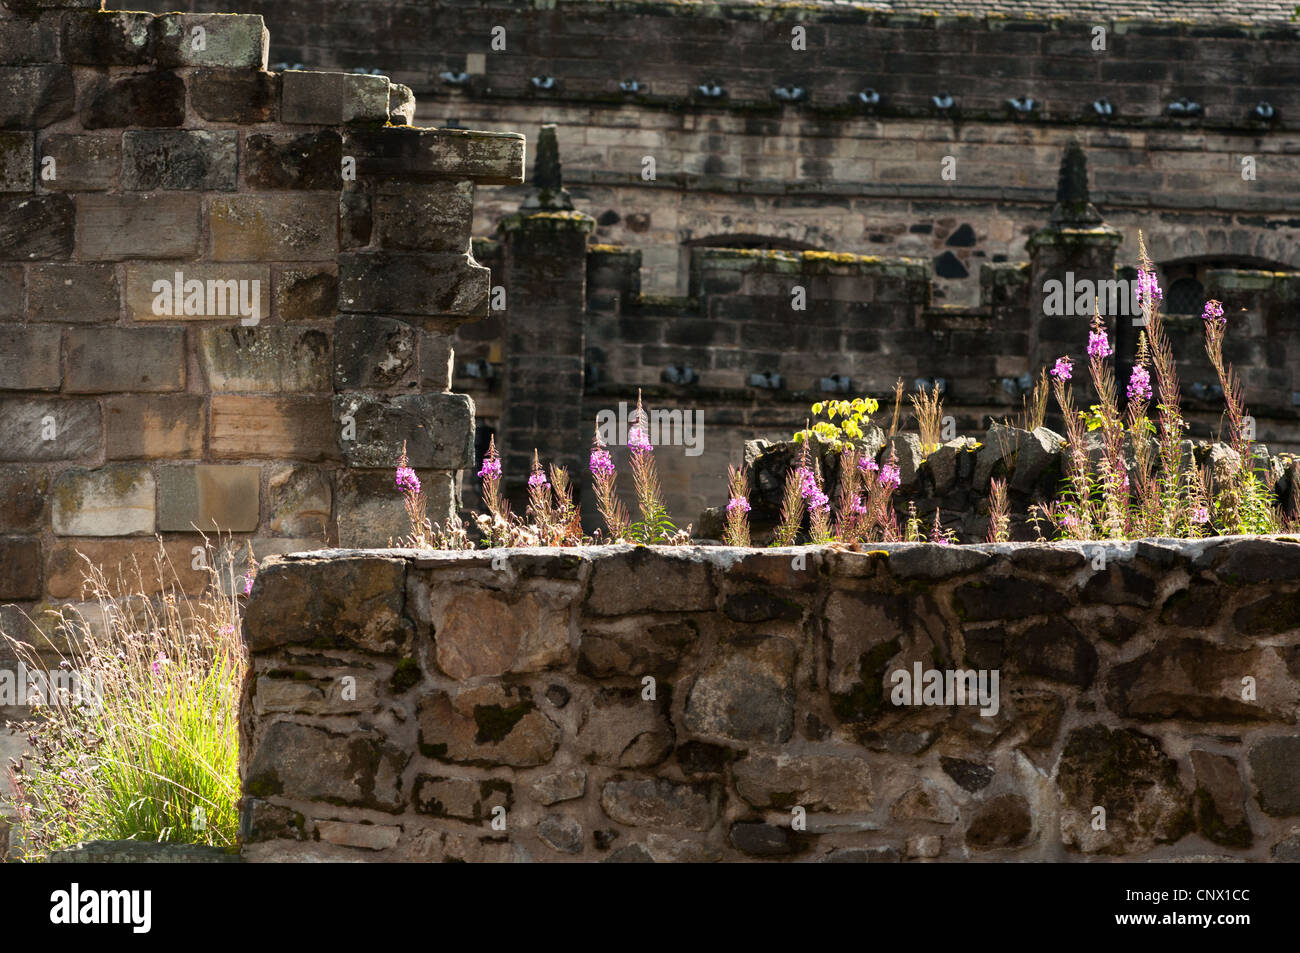 Purple Loosestrife, Lythrum salicaria, growing near the walls of Stirling Castle, Scotland. Stock Photo